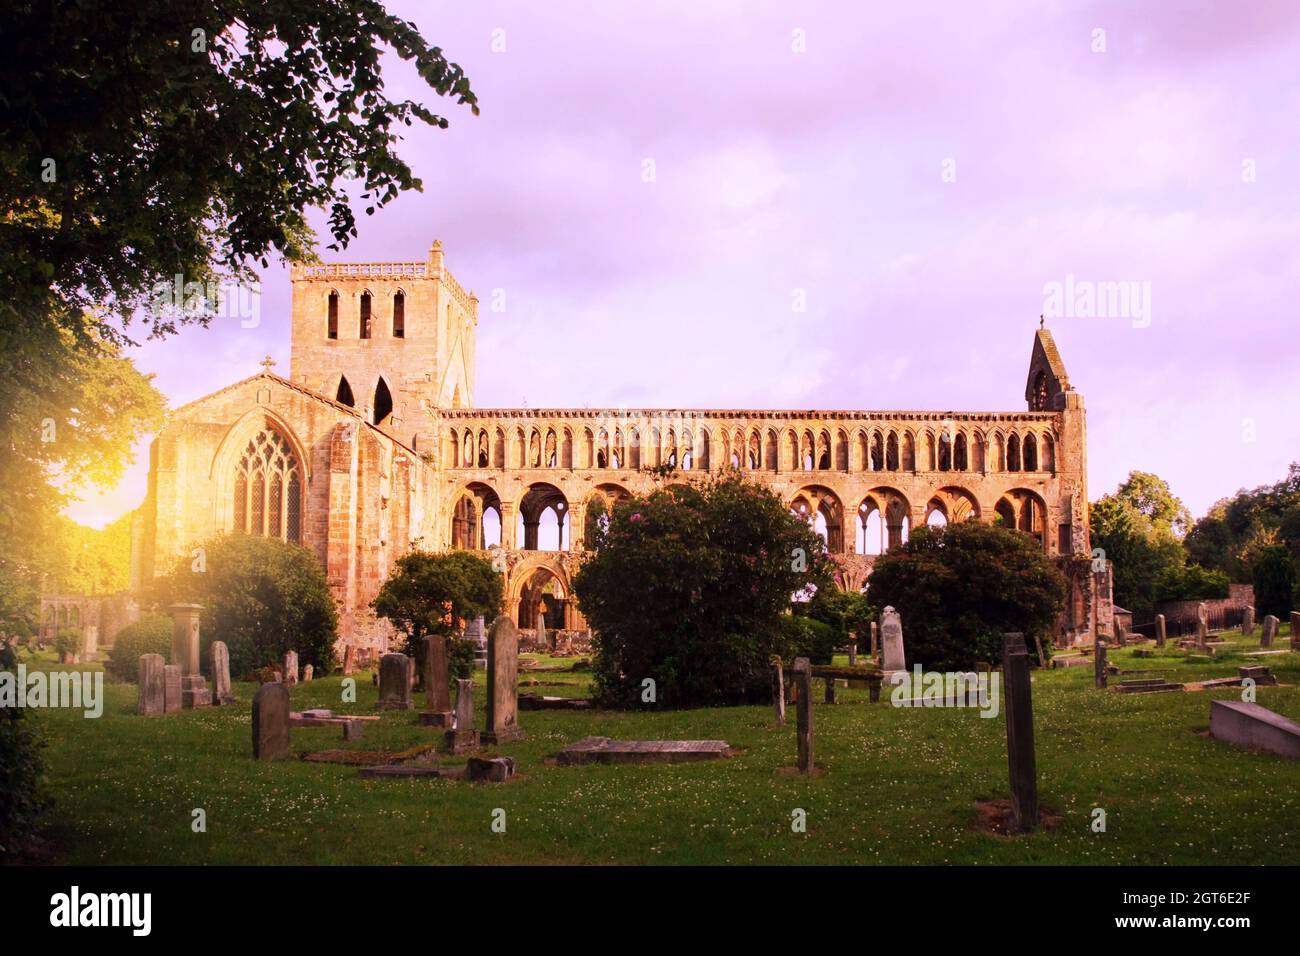 ruined Jedburgh Abbey Scotland, United Kingdom, which was founded in the 12th century, is situated in the town of Jedburgh. Stock Photo